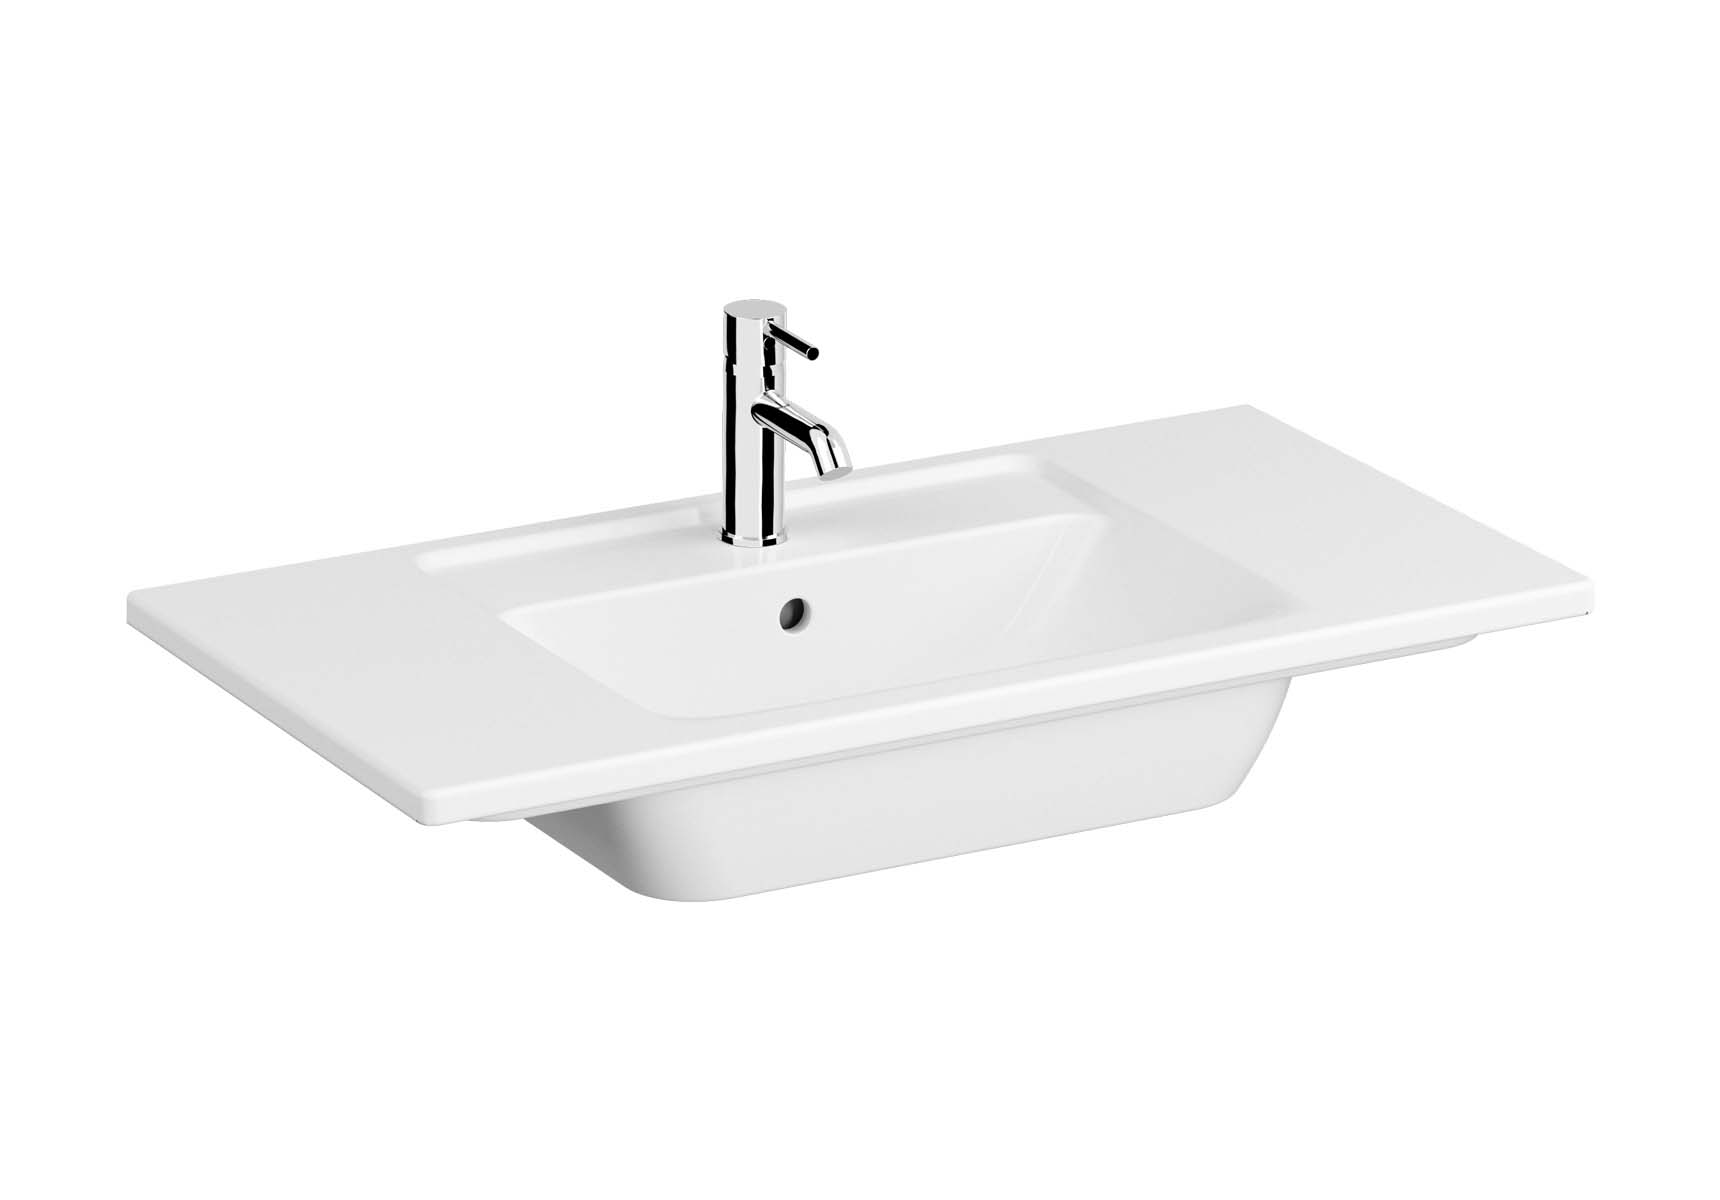 Vanity Basin, 90 cm, One Tap Hole, With Overflow Hole